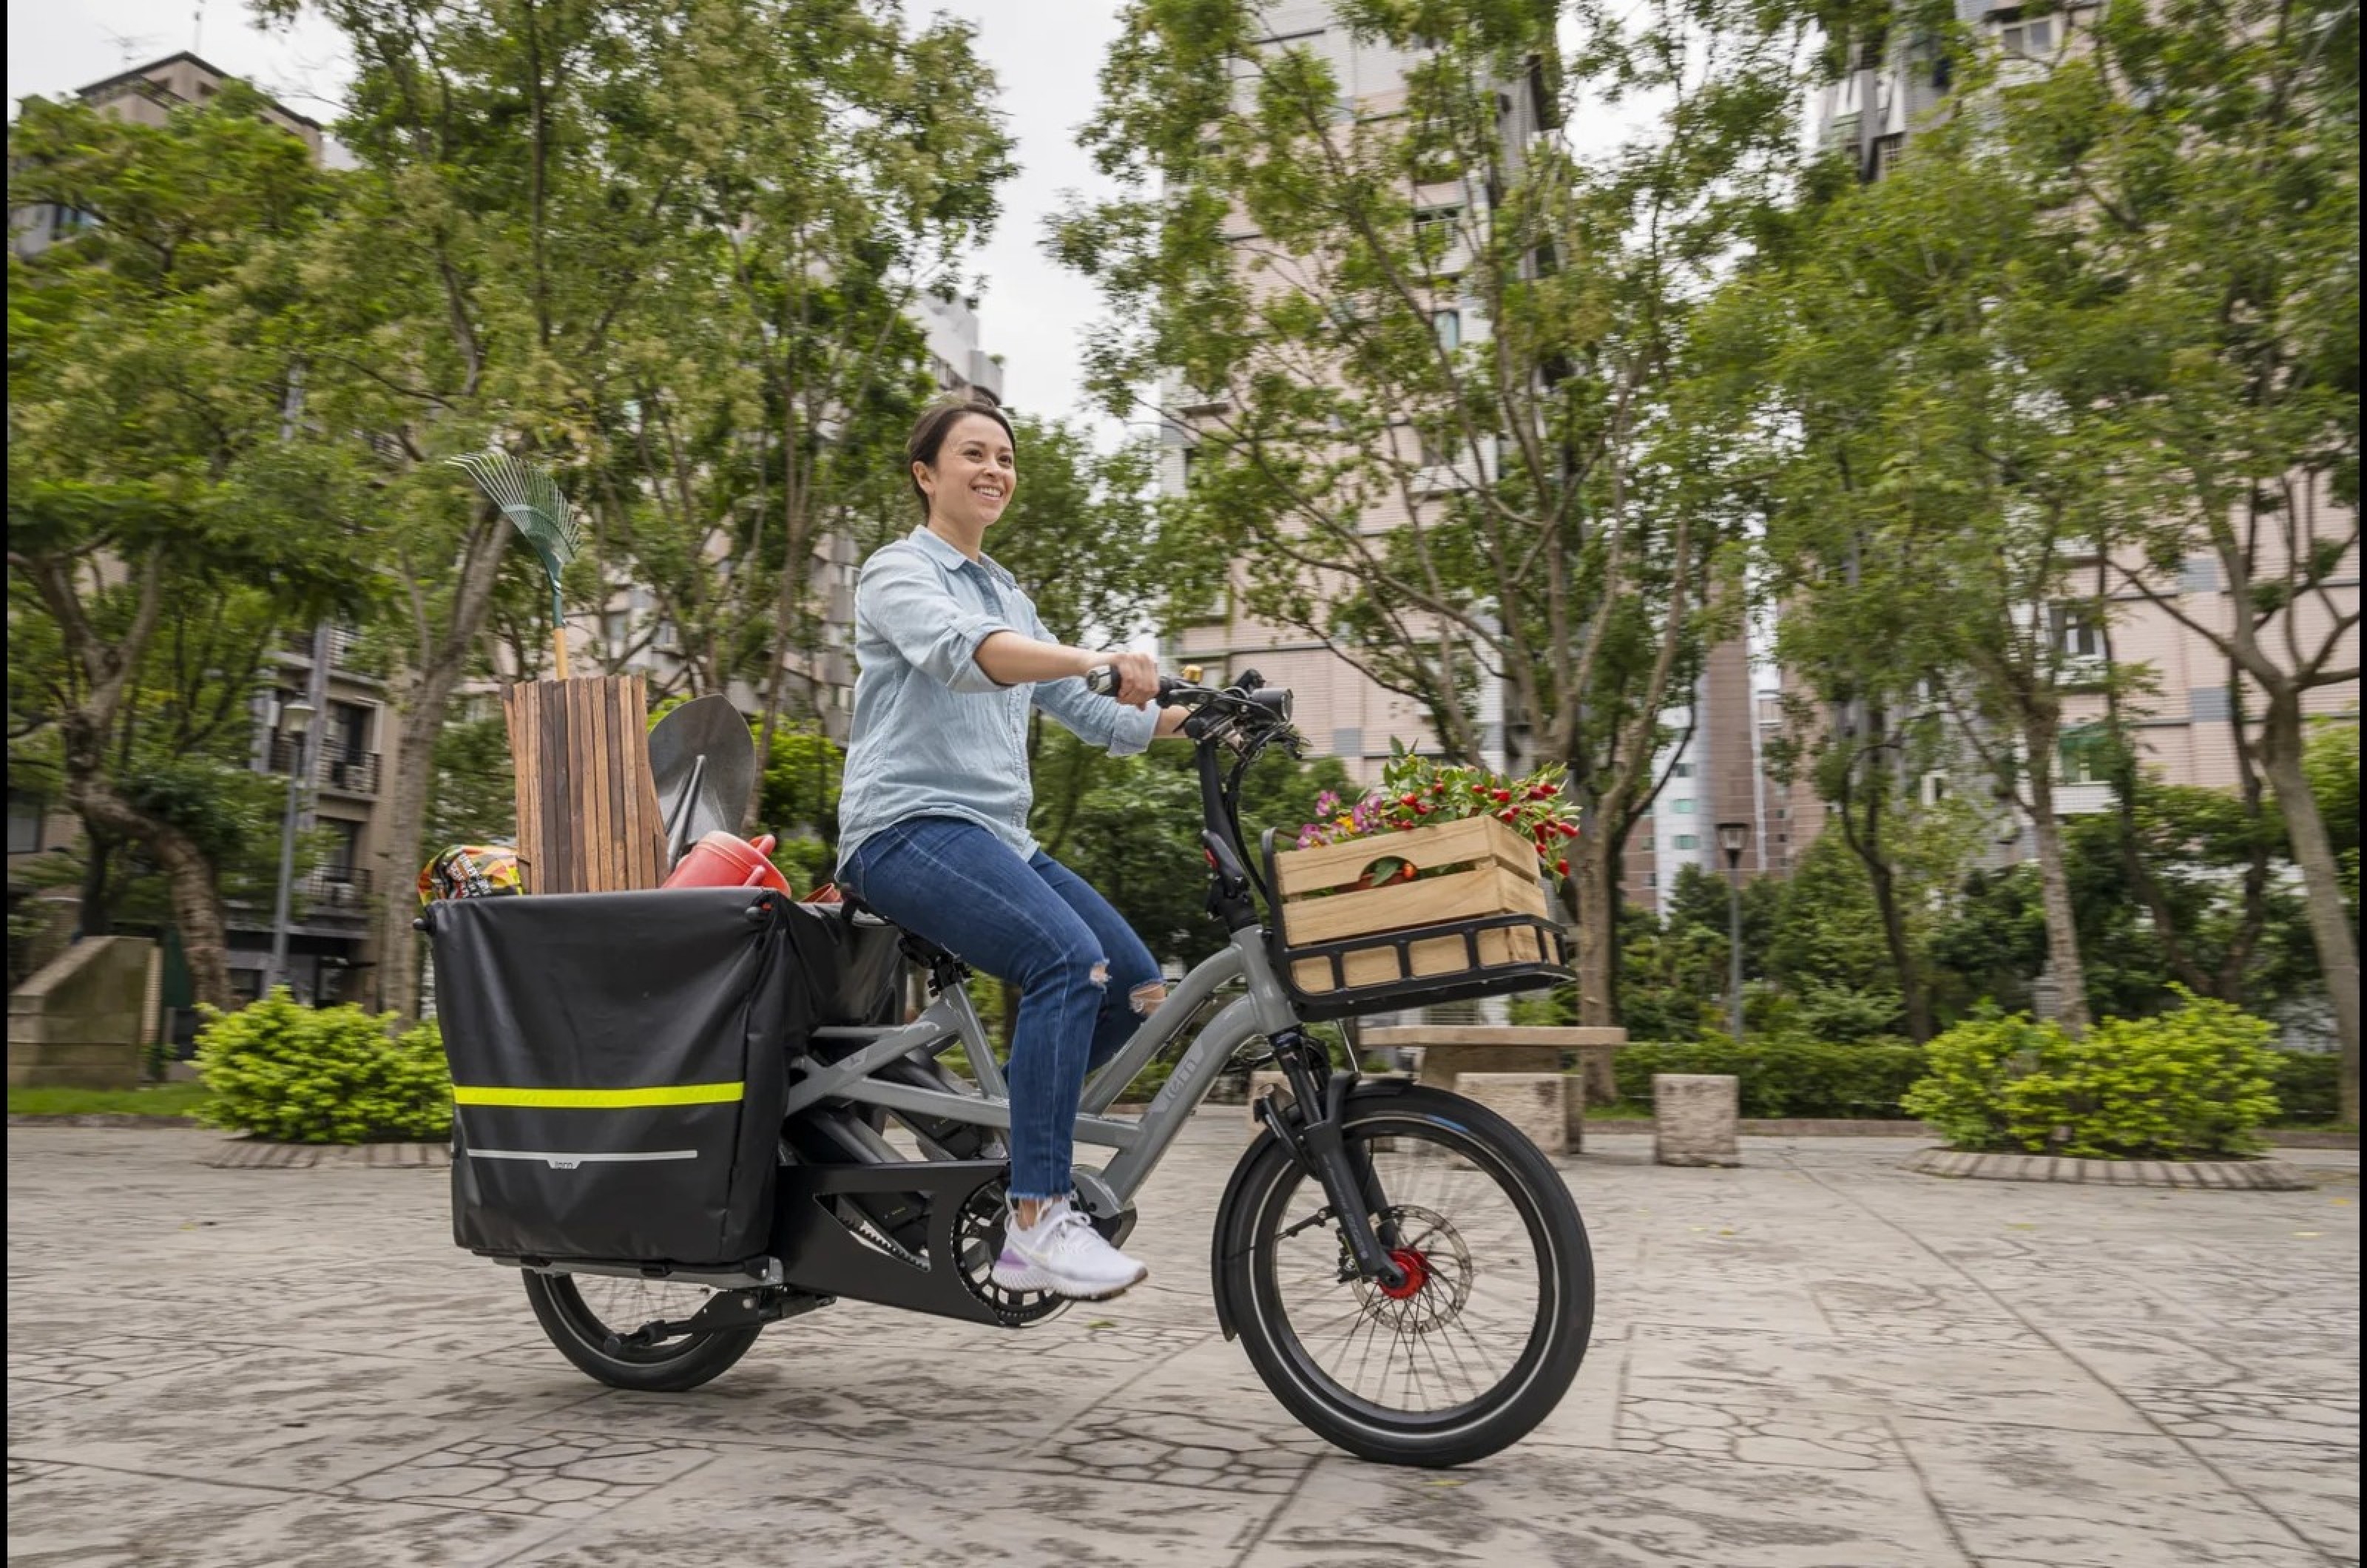 <p>The GSD S10 LR is designed with delivery in mind and buyers can purchase attachable components such as canopy child carriers, delivery crates, a shortbed tray, and even a bike tow kit. Its frame can carry up to 200kg, although this will, of course, affect the range. The S10 has 10 speeds, four selectable drive modes and is driven by a 63lb ft motor paired to a dual battery (900Wh), giving a range of 121 miles. Prices start from $5699 in the US for the dual battery option or £5100 for those in the UK. </p>